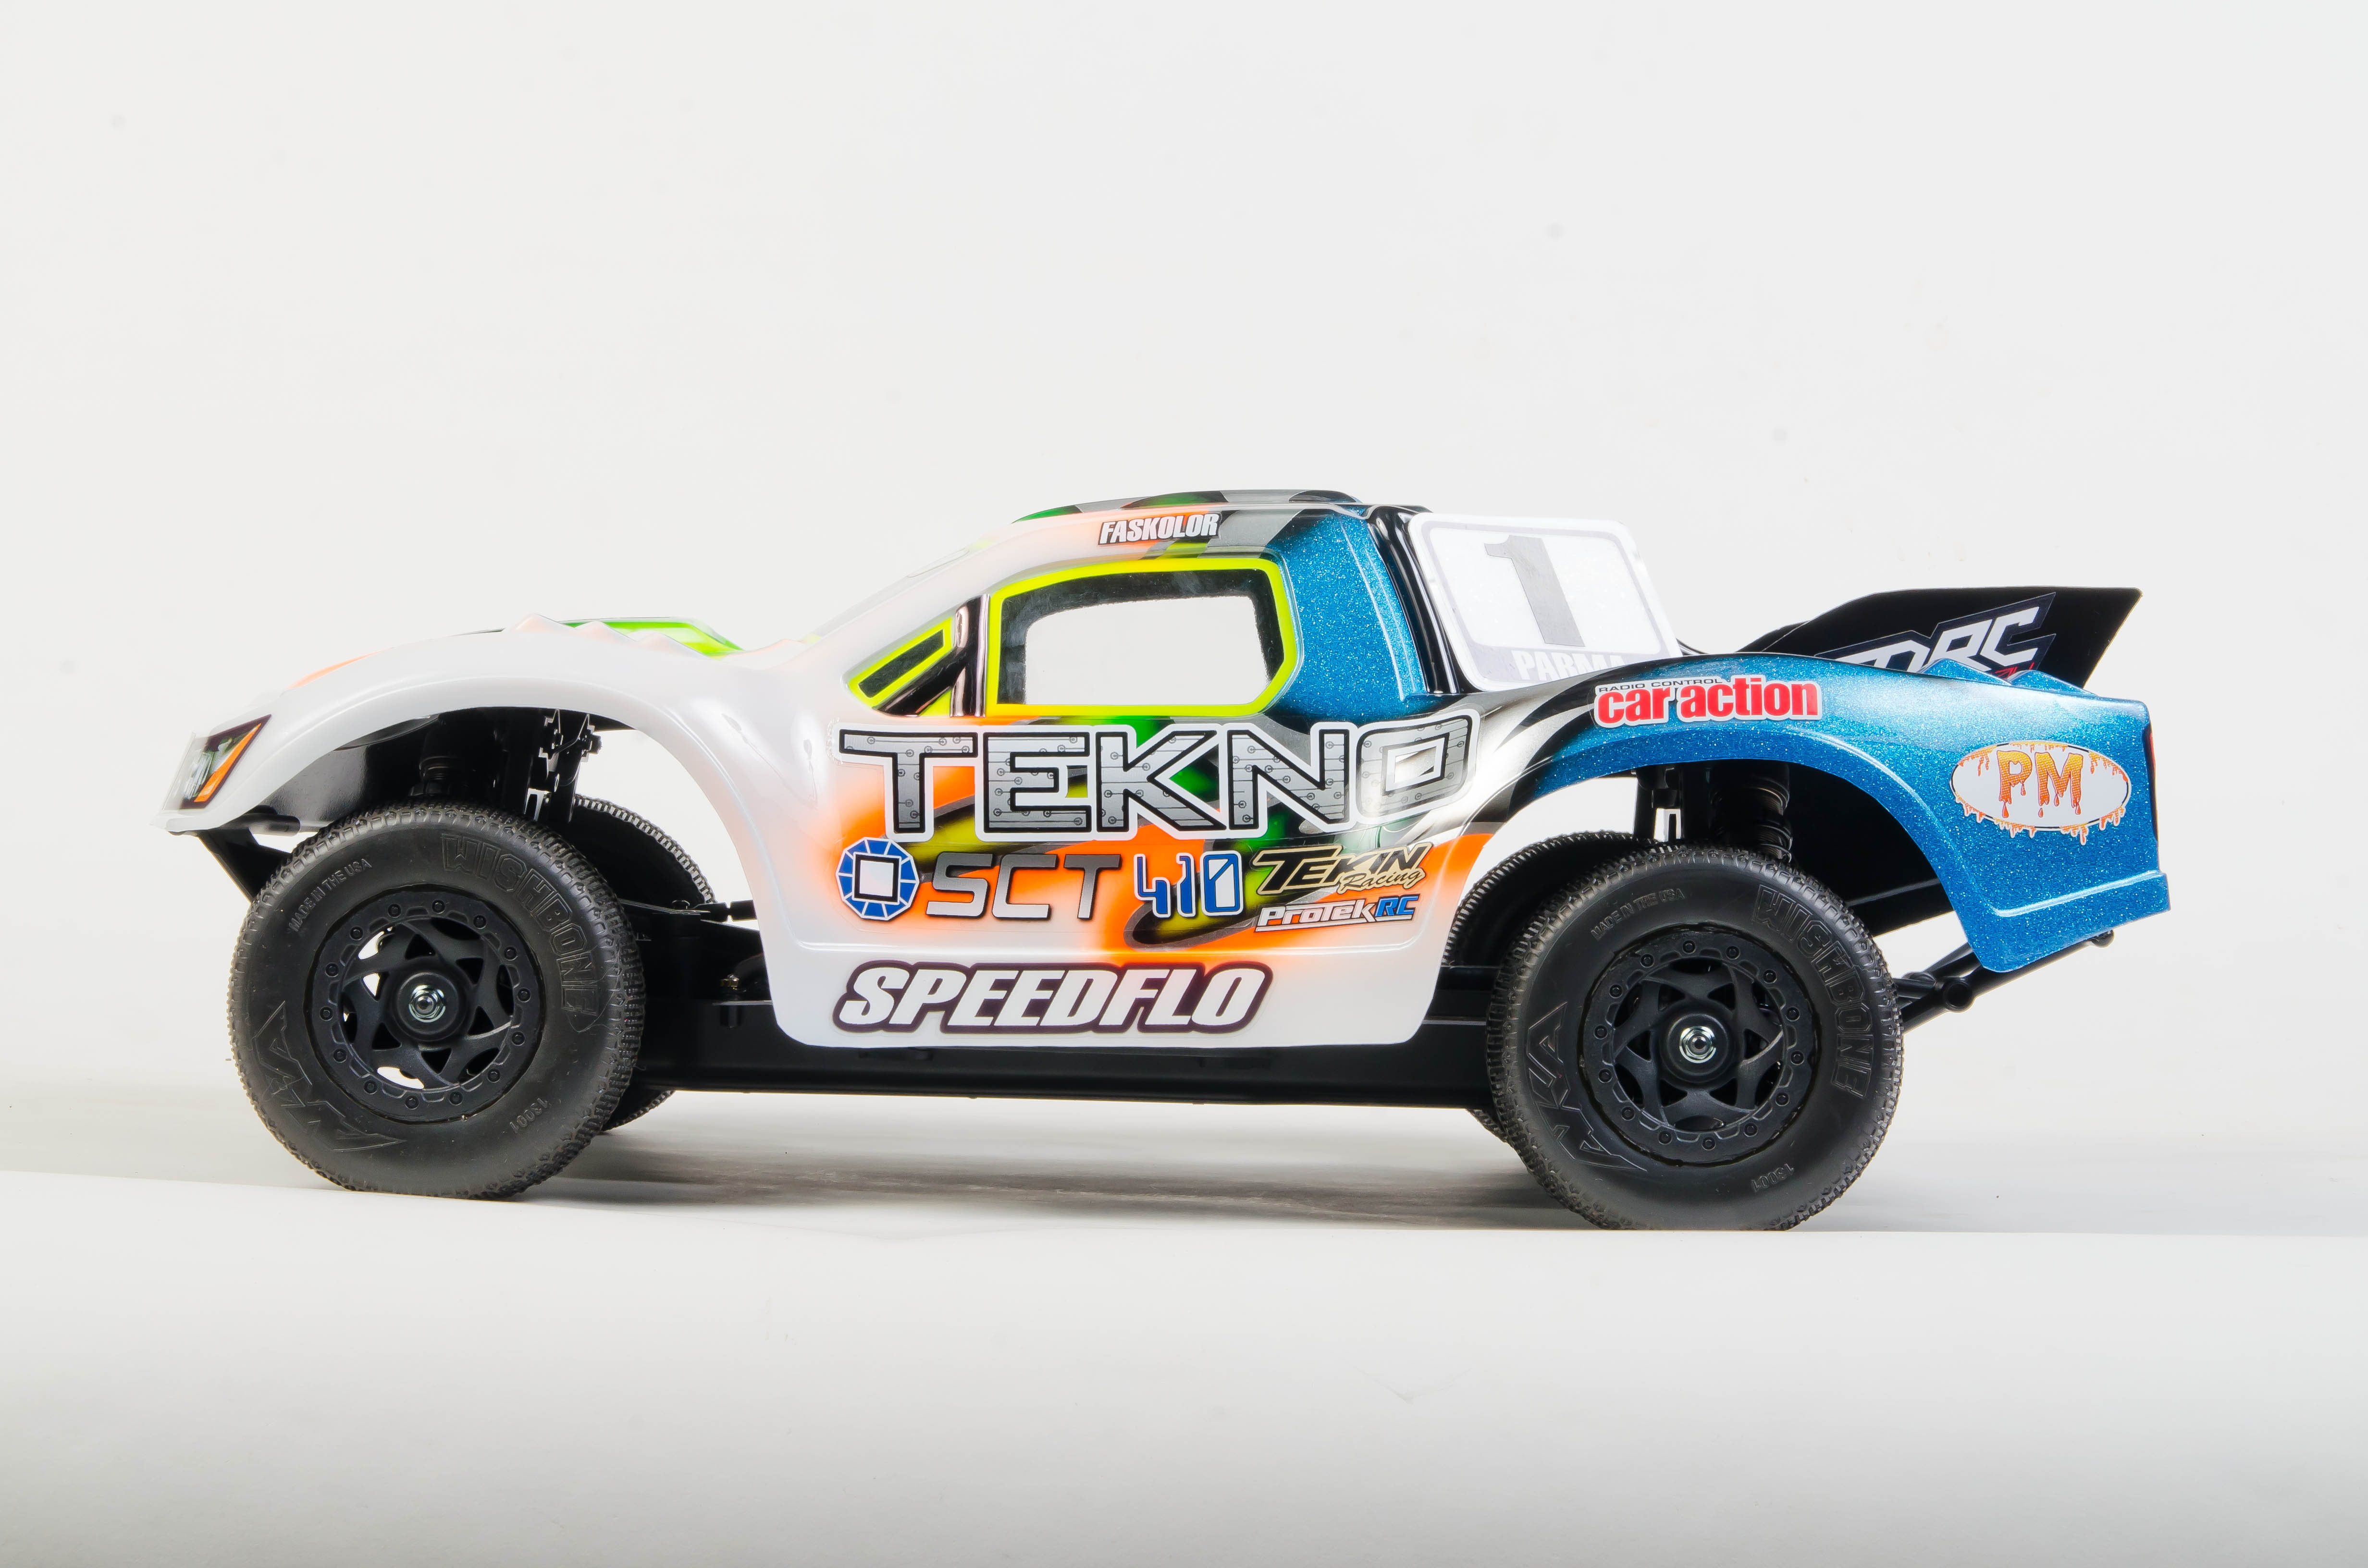 Tekno Video Release of the SCT410